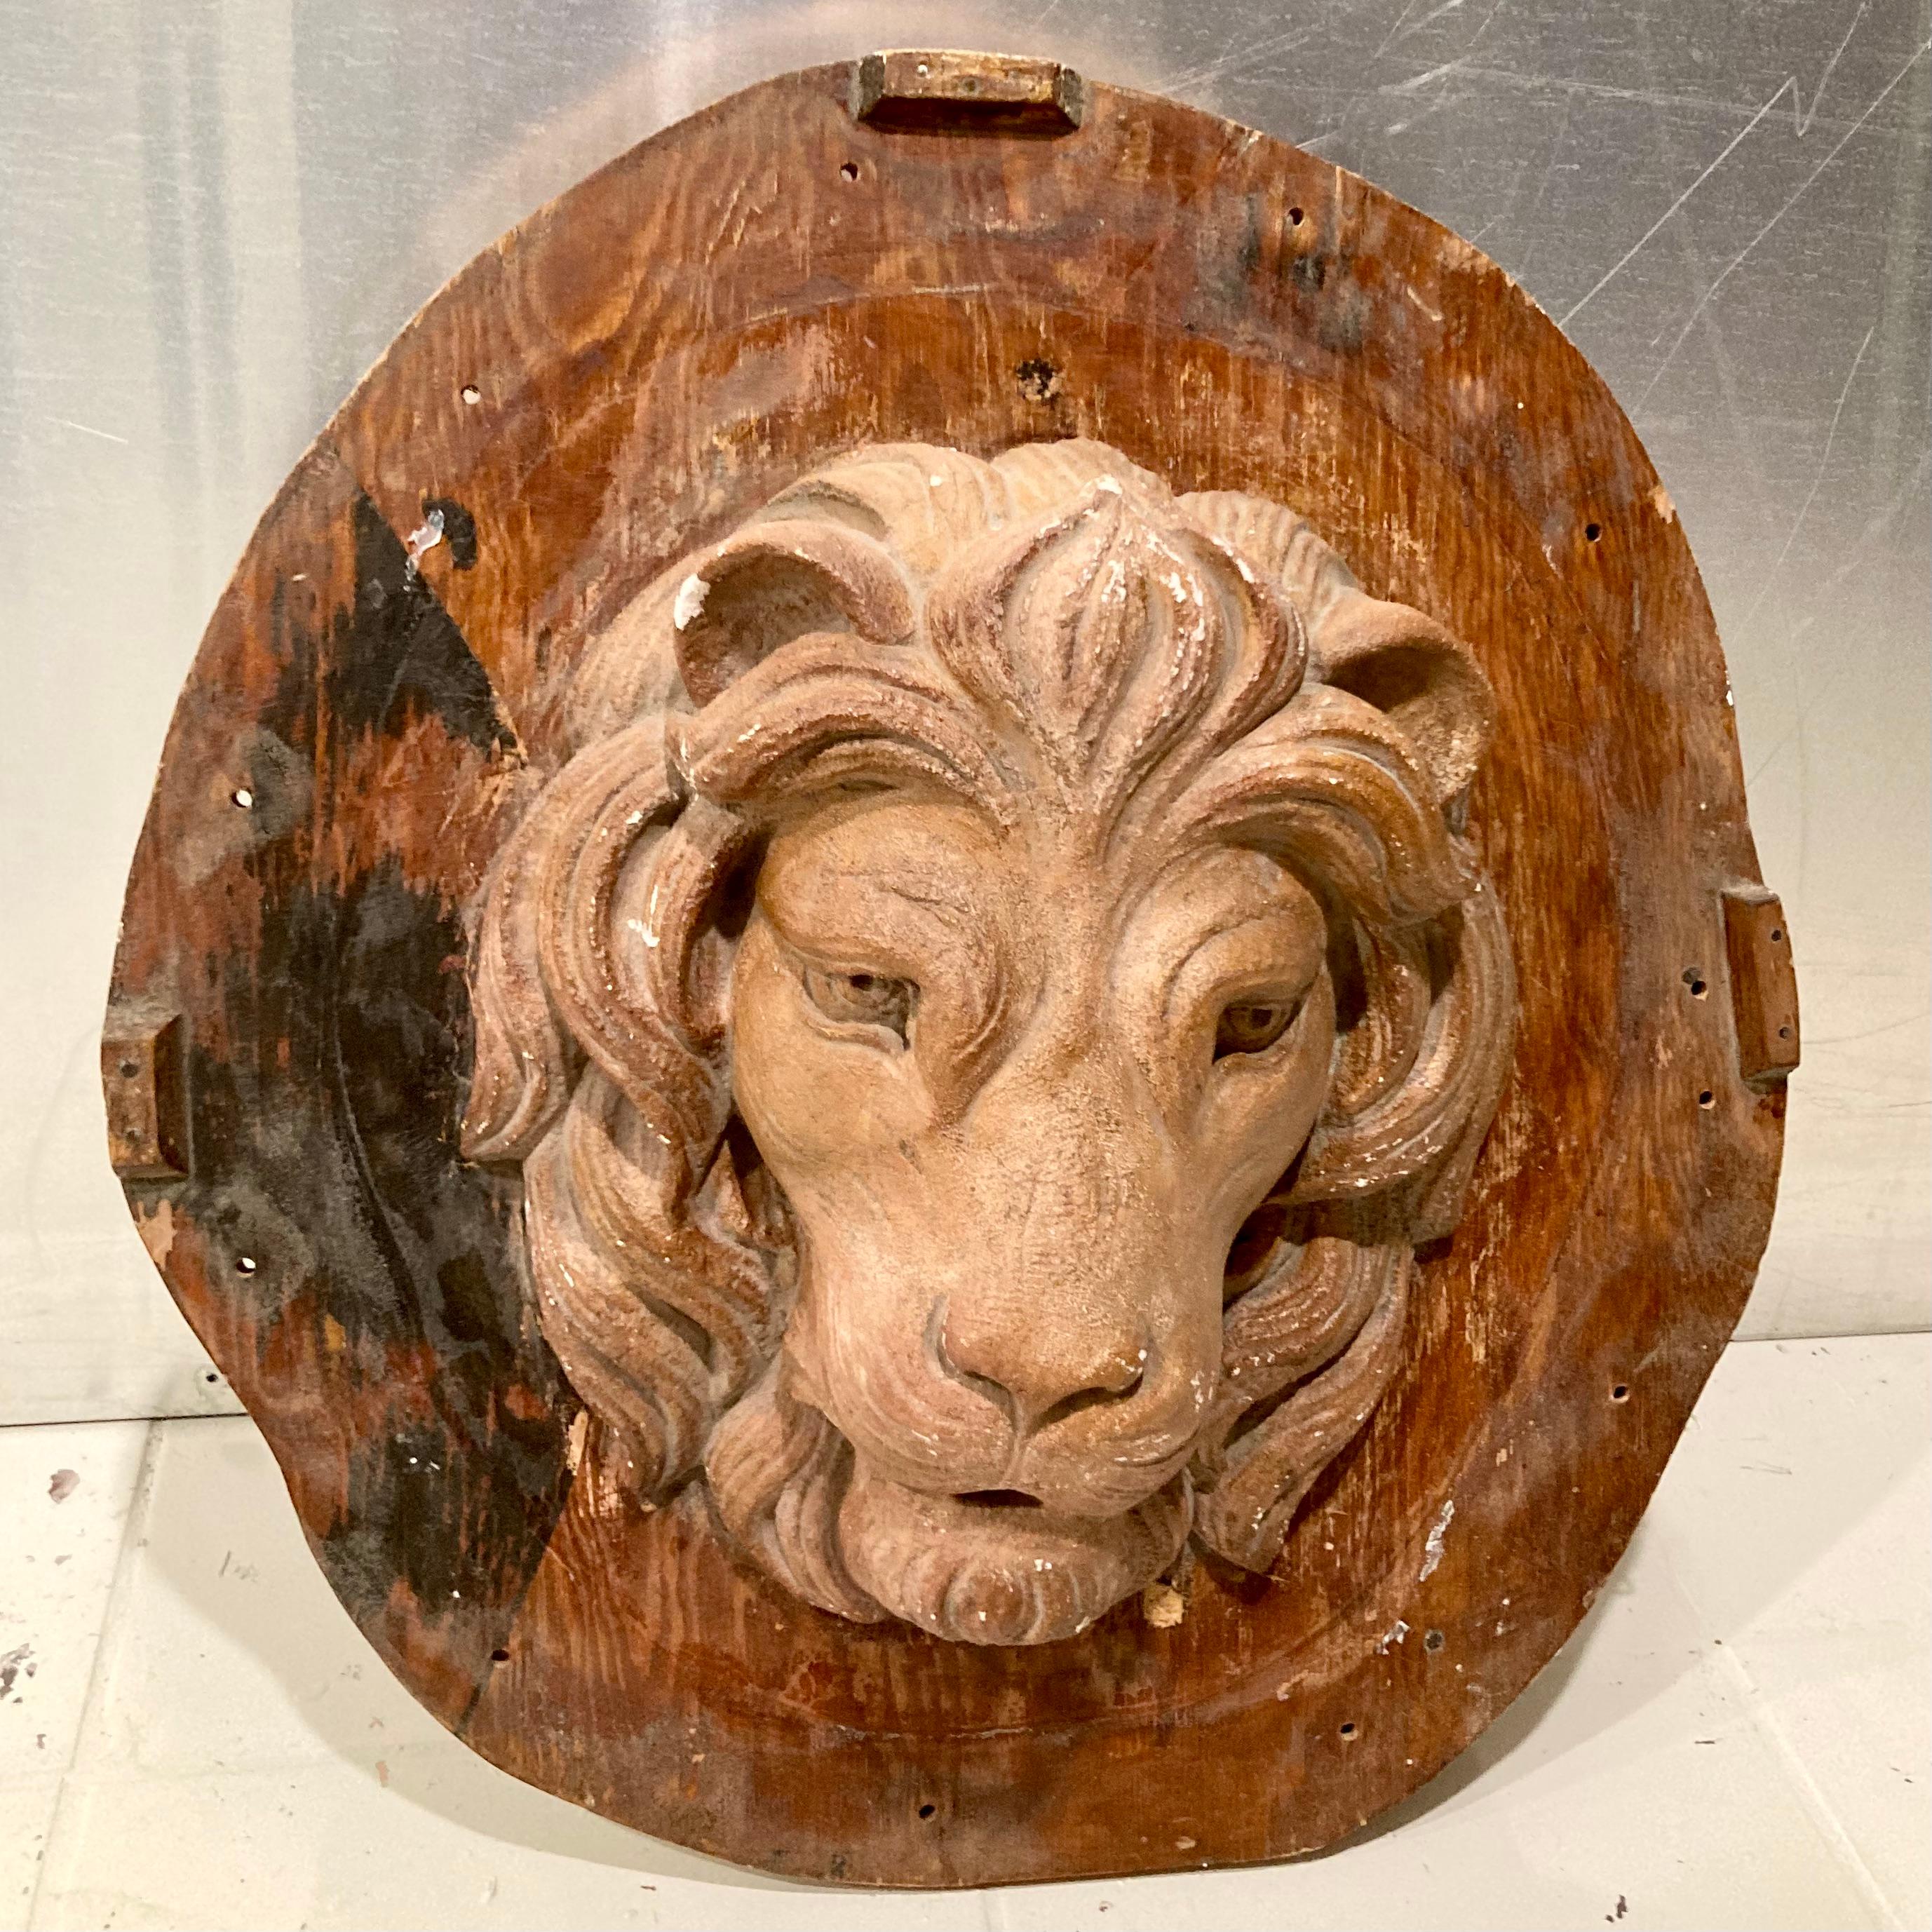 Beautiful Tony Duquette mold piece of the iconic MGM's lion head. Great addition to your interiors and wall decor. and fabulous piece of history.